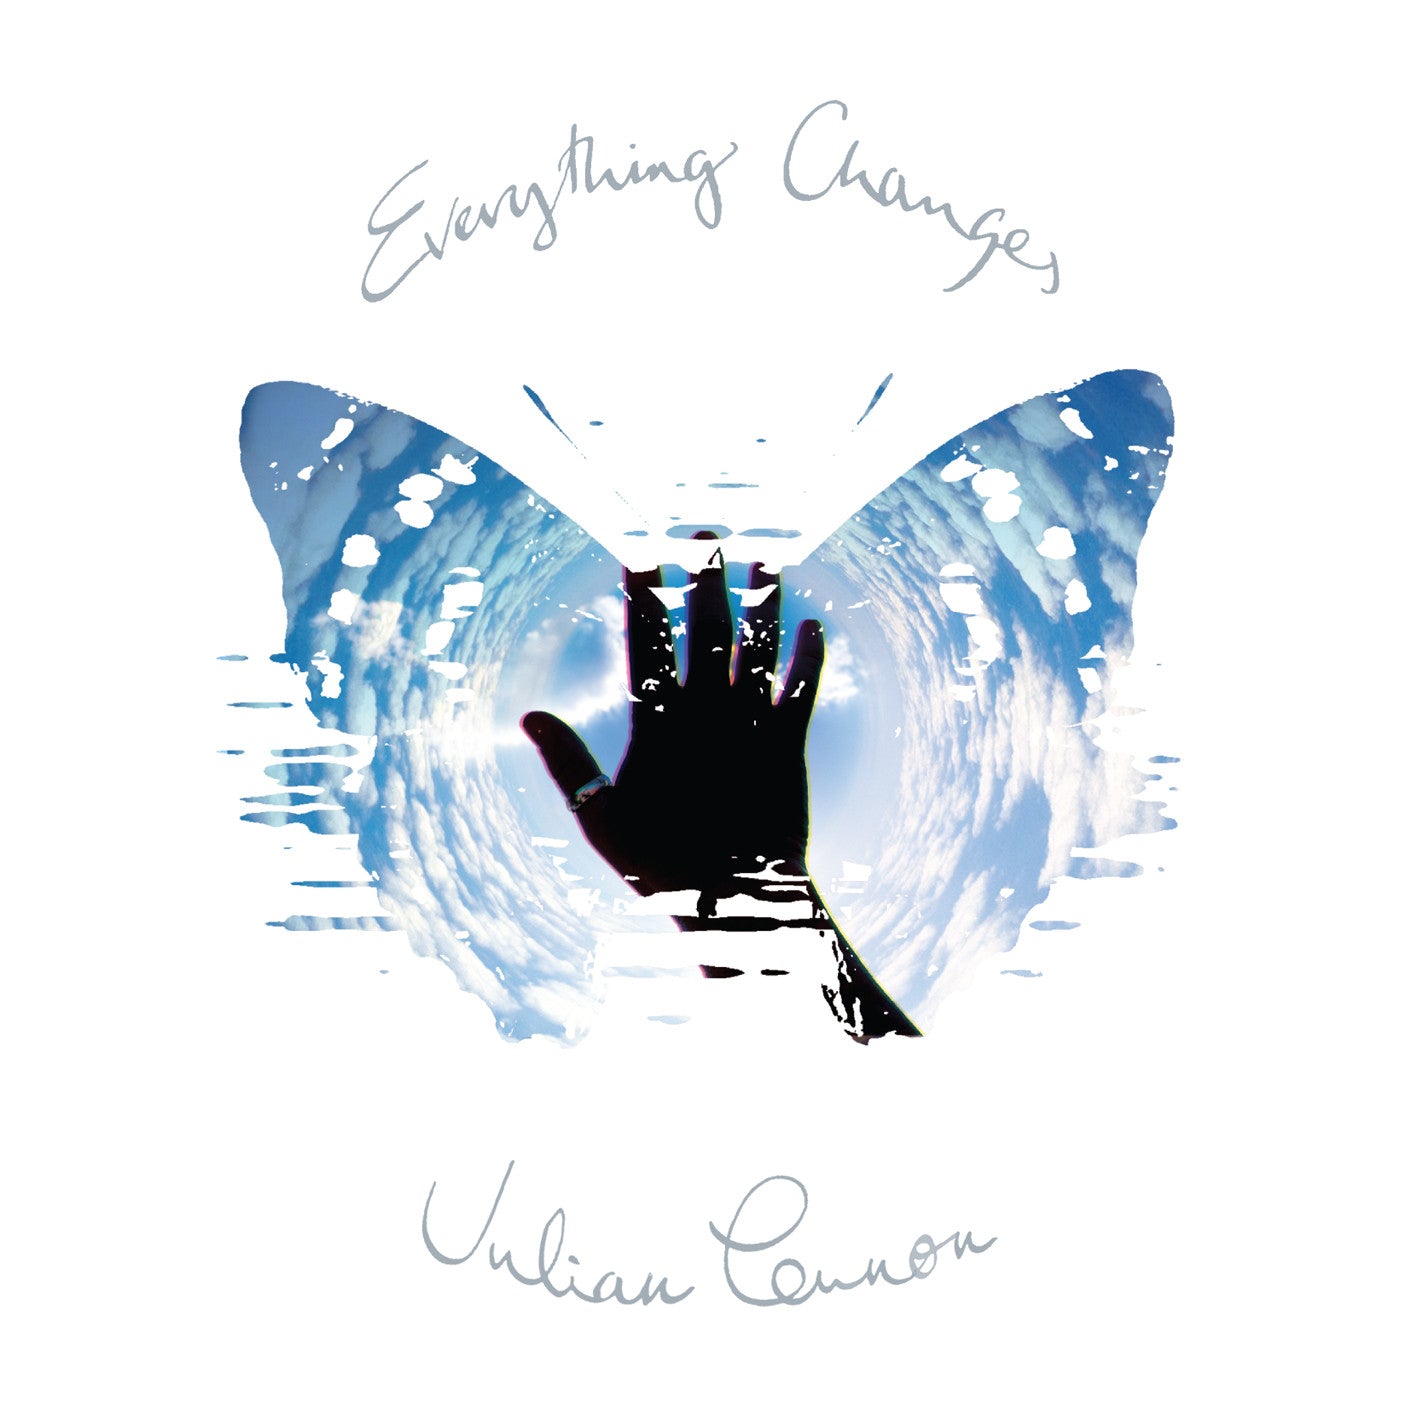 Everything Changes (Studio Album) - Digital Download (MP3) *note for mobile devices